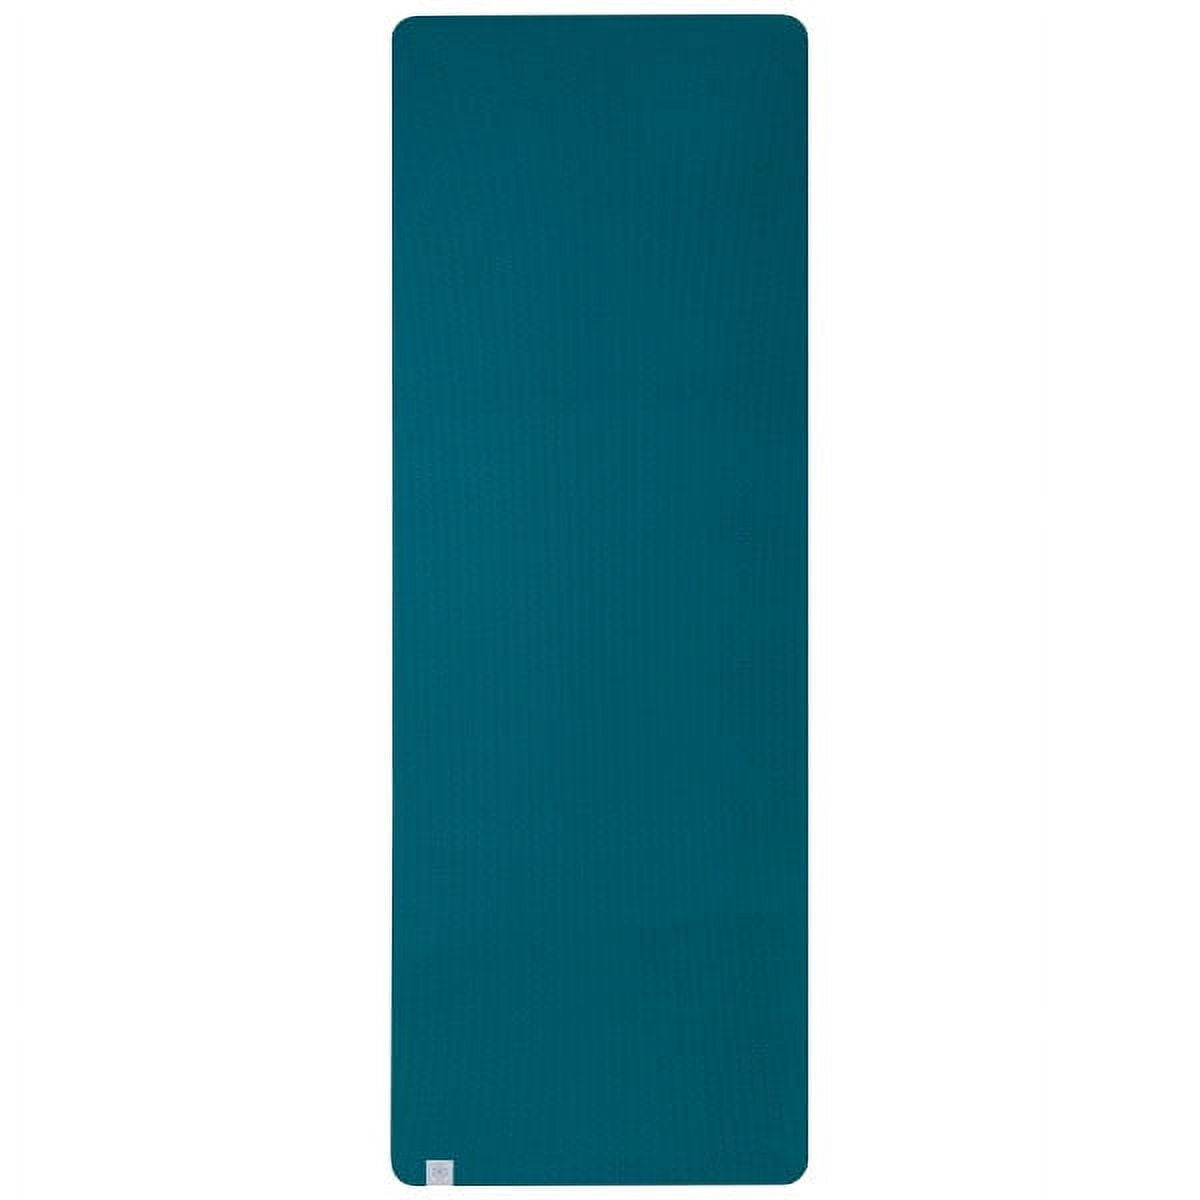  Gaiam Yoga Mat Performance TPE Exercise & Fitness Mat for All  Types of Yoga, Pilates & Floor Exercises, Sangria/Lagoon, 6mm : Everything  Else